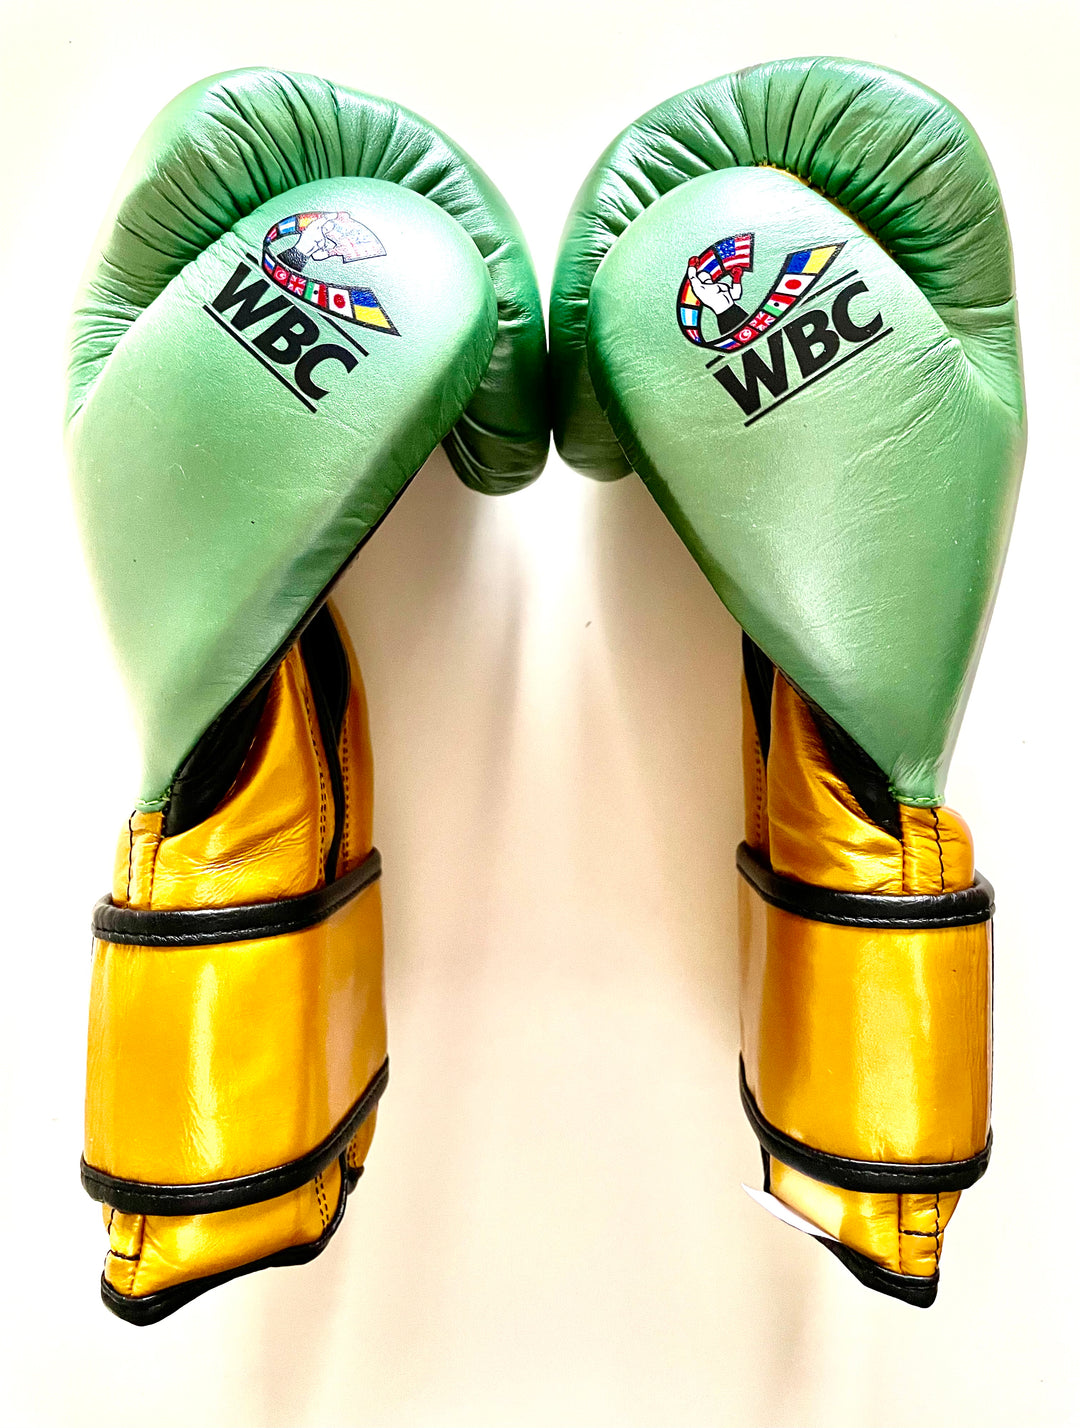 Cleto Reyes Boxhandschuhe Sparring, WBC Limited Edition